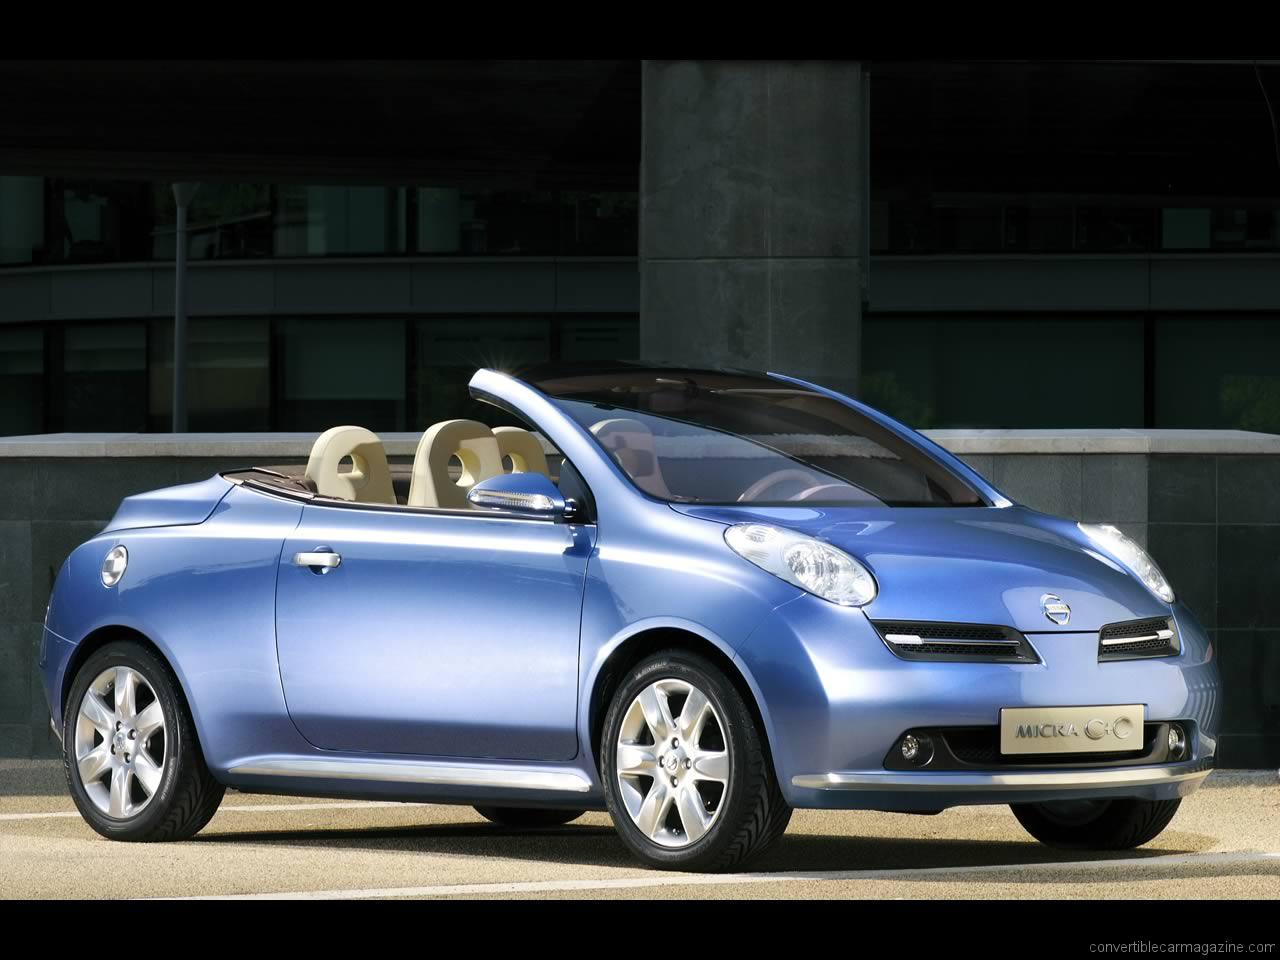 Nissan Micra C+C Buying Guide